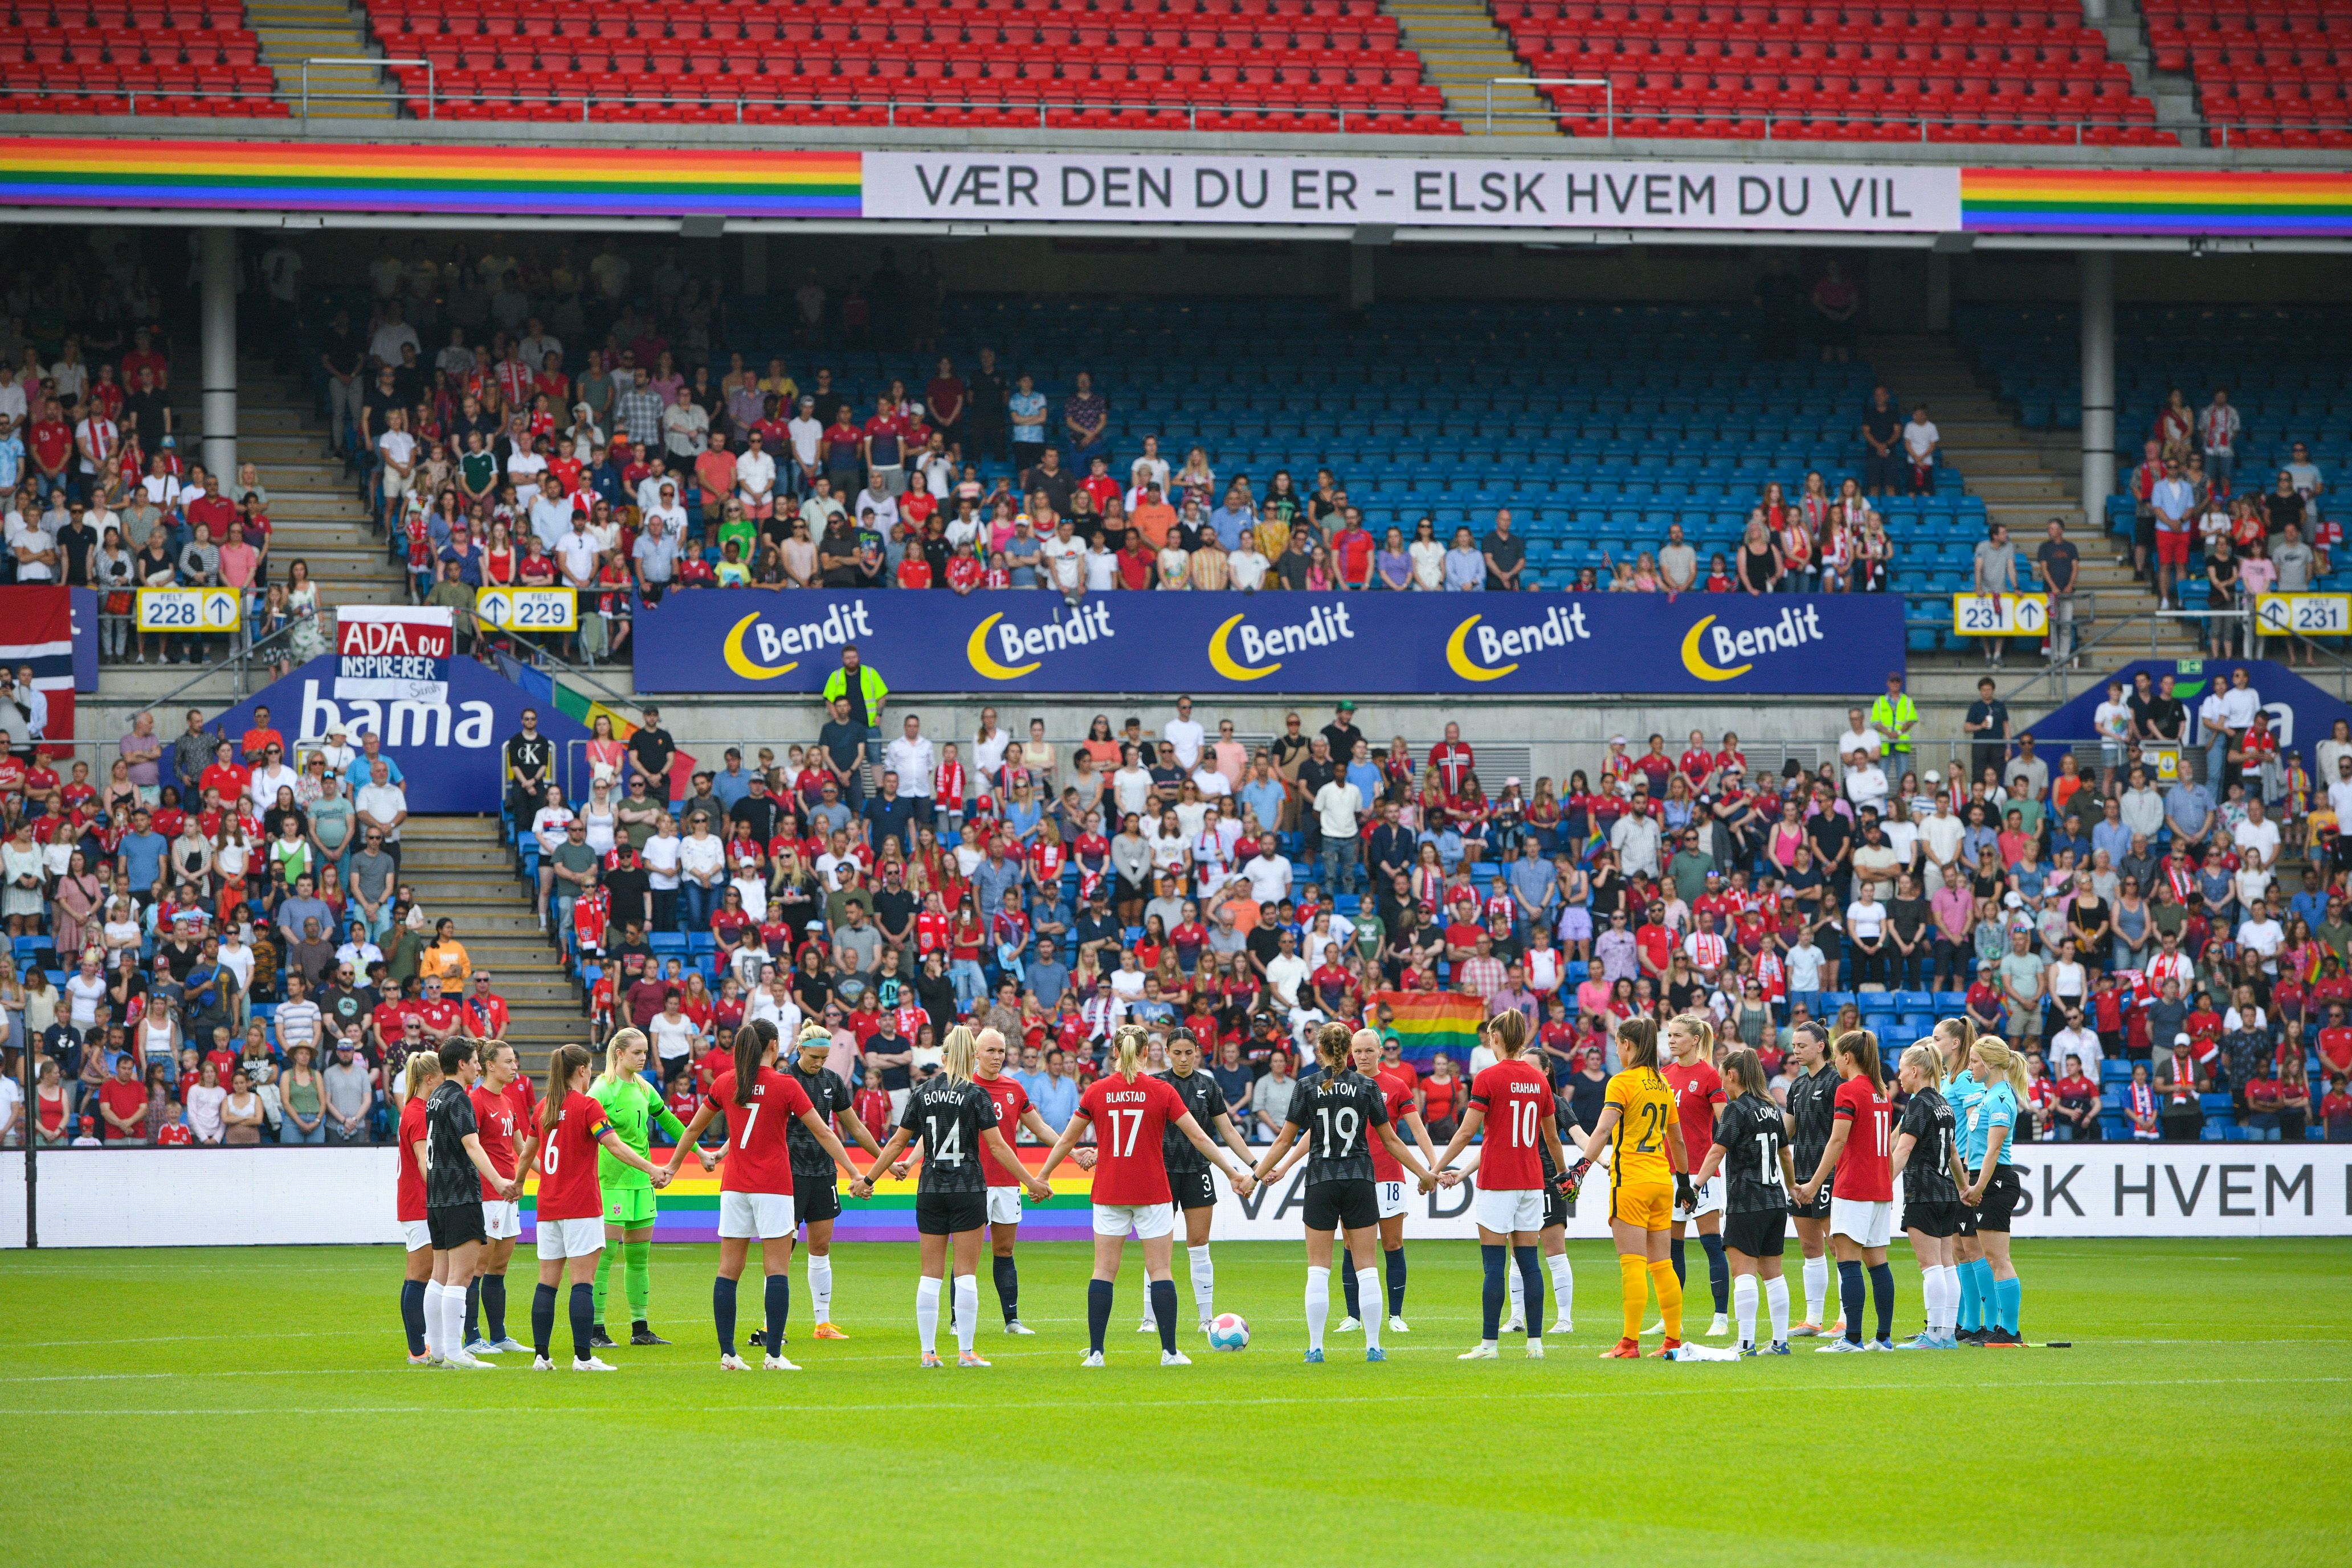 Players from Norway and New Zealand observe a minute of silence Saturday in Oslo for the victims of the shooting at a gay bar.